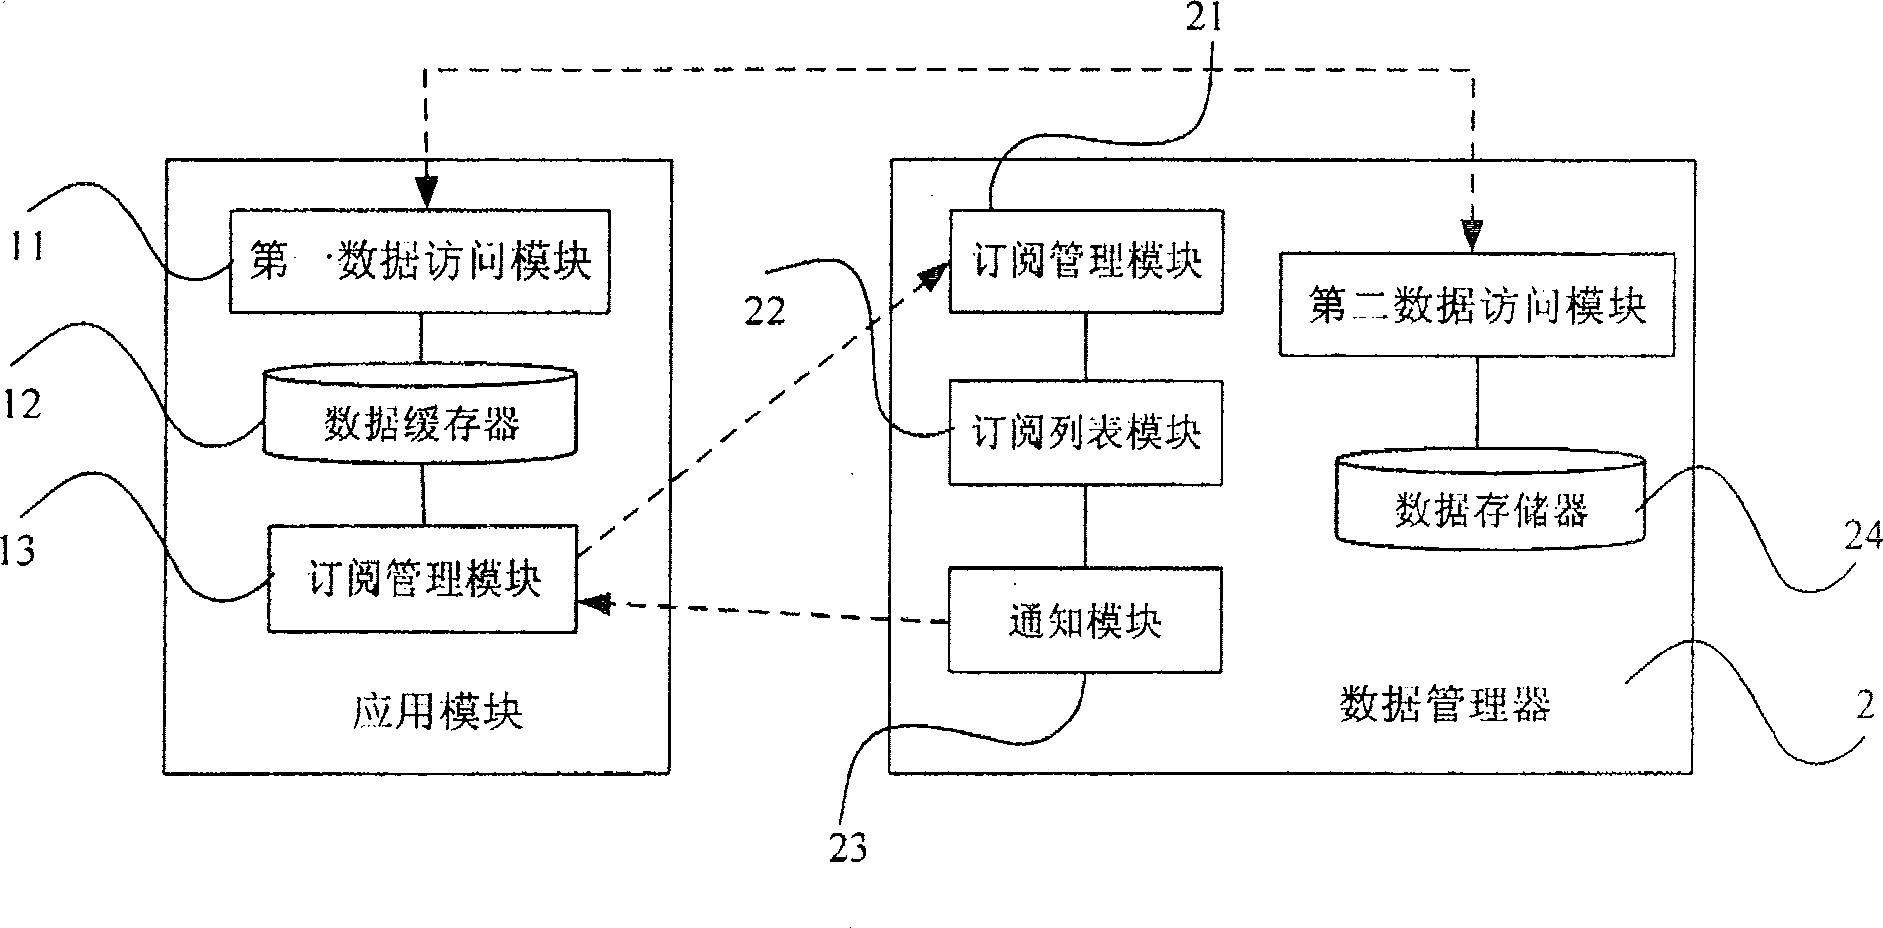 Distributed data management system and method for dynamically subscribing data